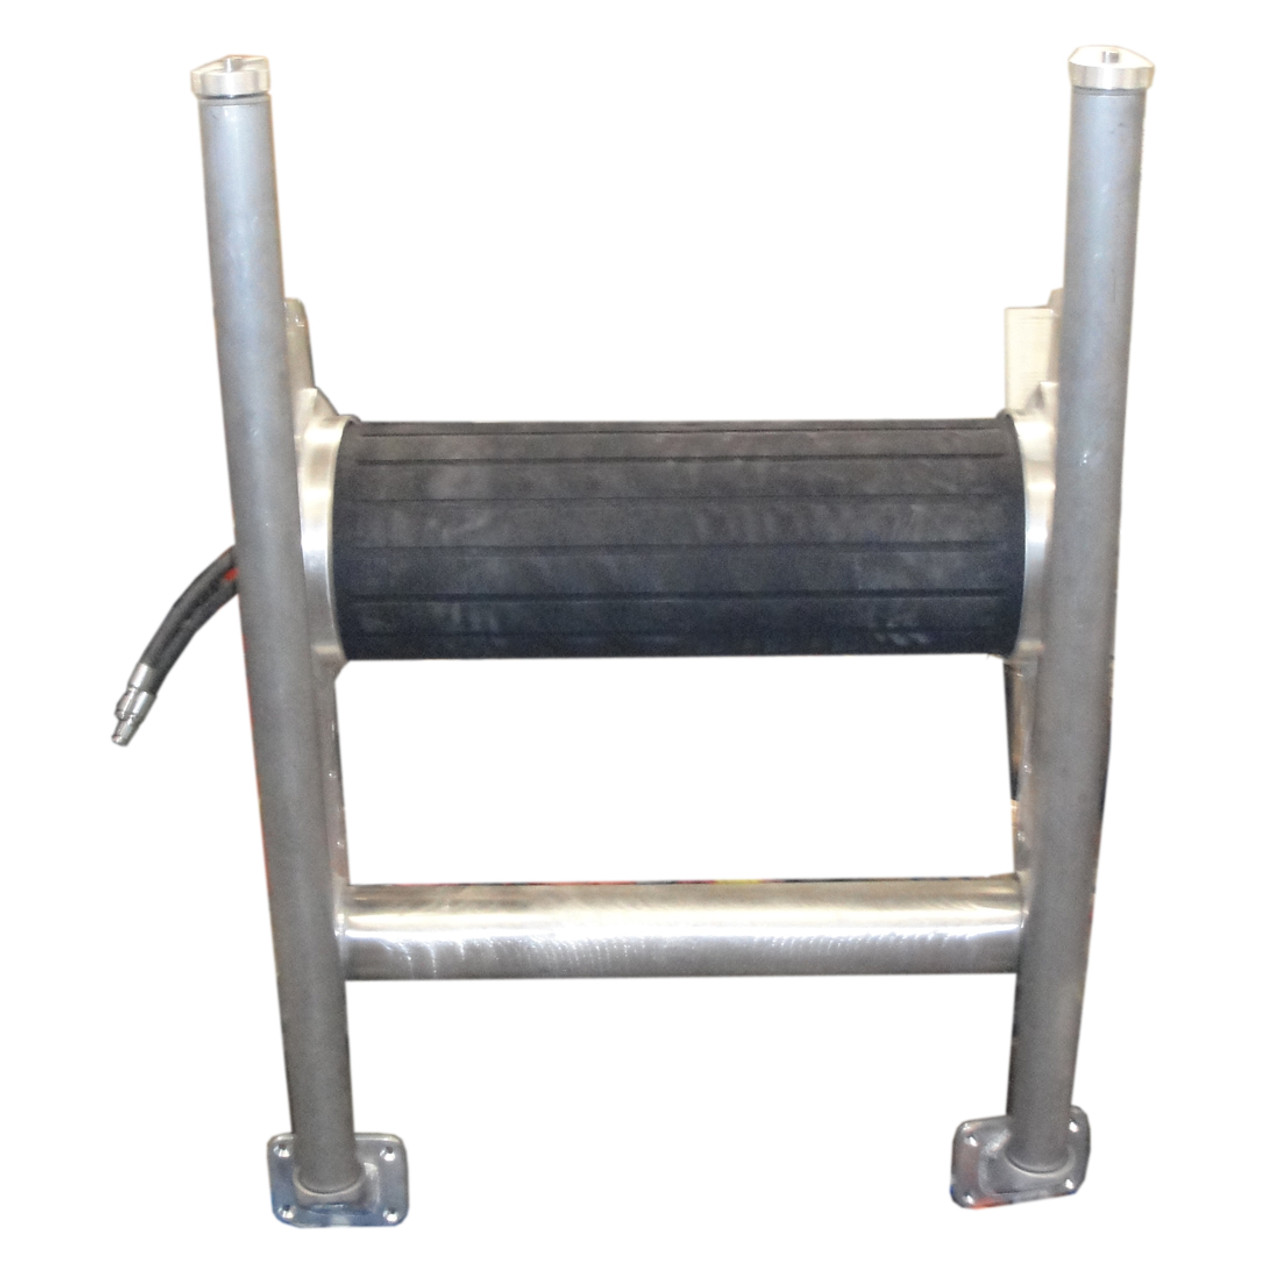 Kolstrand 'Kenai-Special' 40 Inch Power Net Roller with Frame and Lower Horizontal Idle Roller